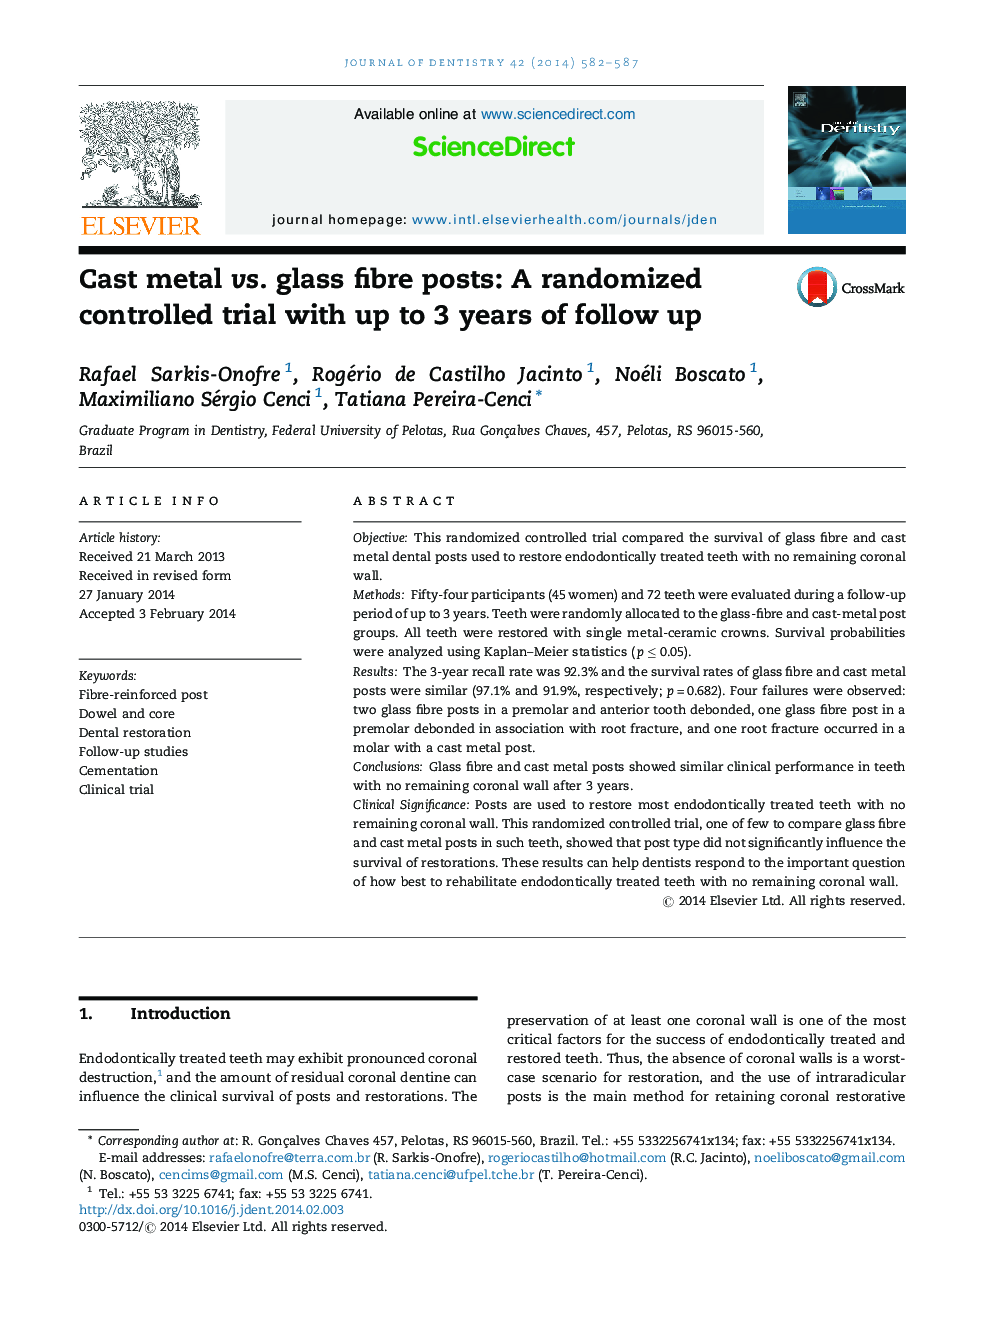 Cast metal vs. glass fibre posts: A randomized controlled trial with up to 3 years of follow up